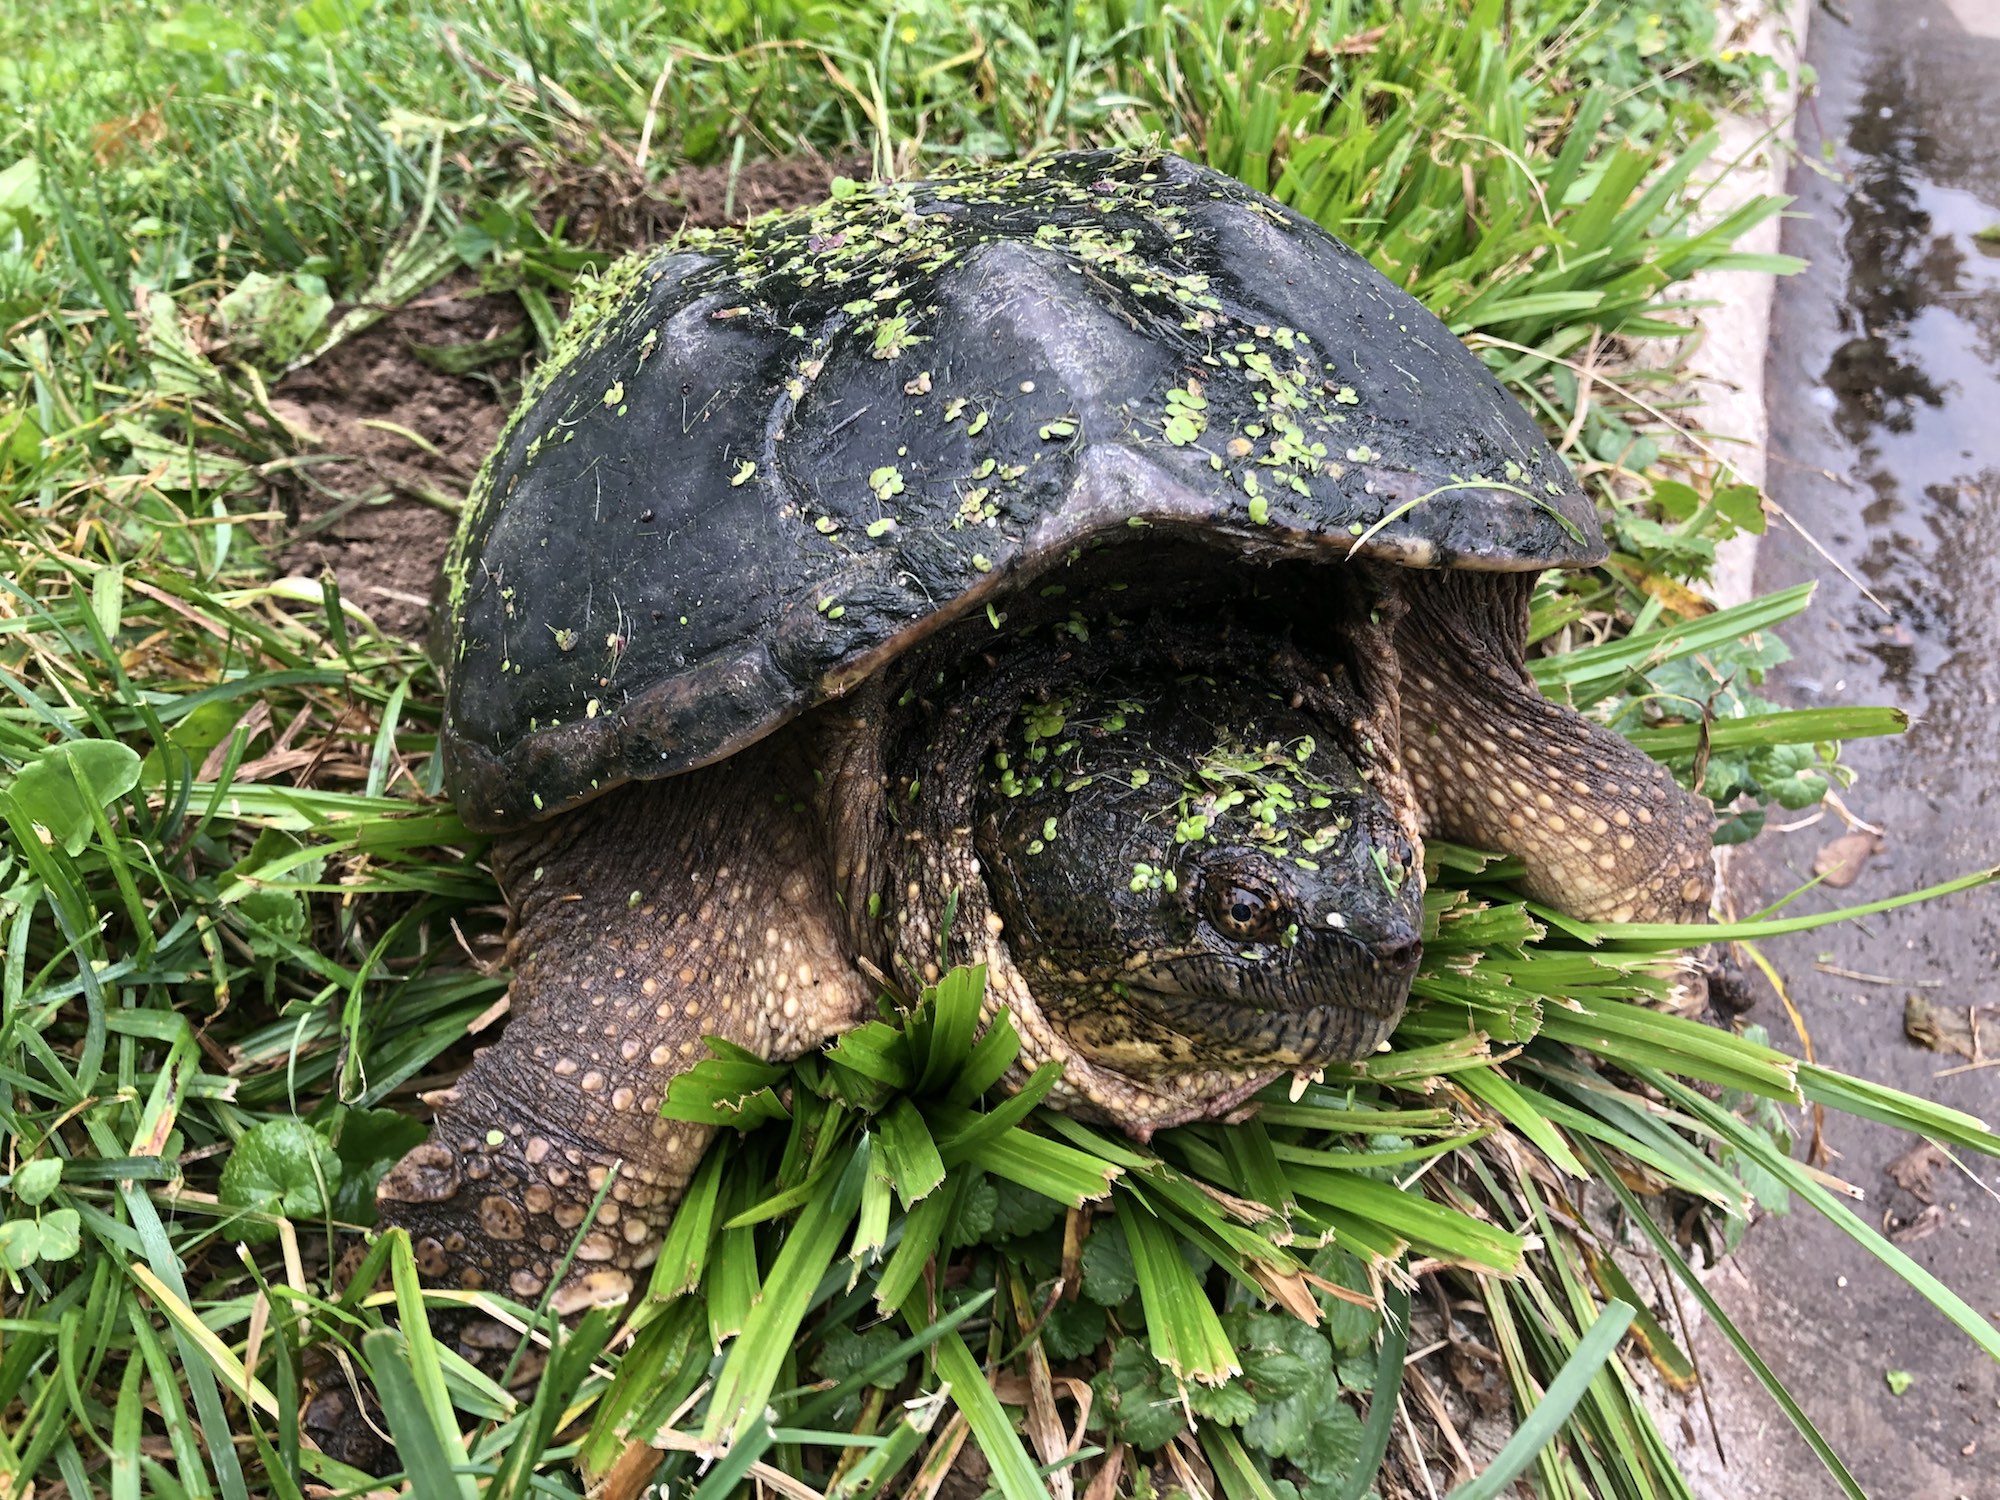 Snapping Turtle laying eggs along Arbor Drive in Madison, Wisconsin on June 24, 2019.